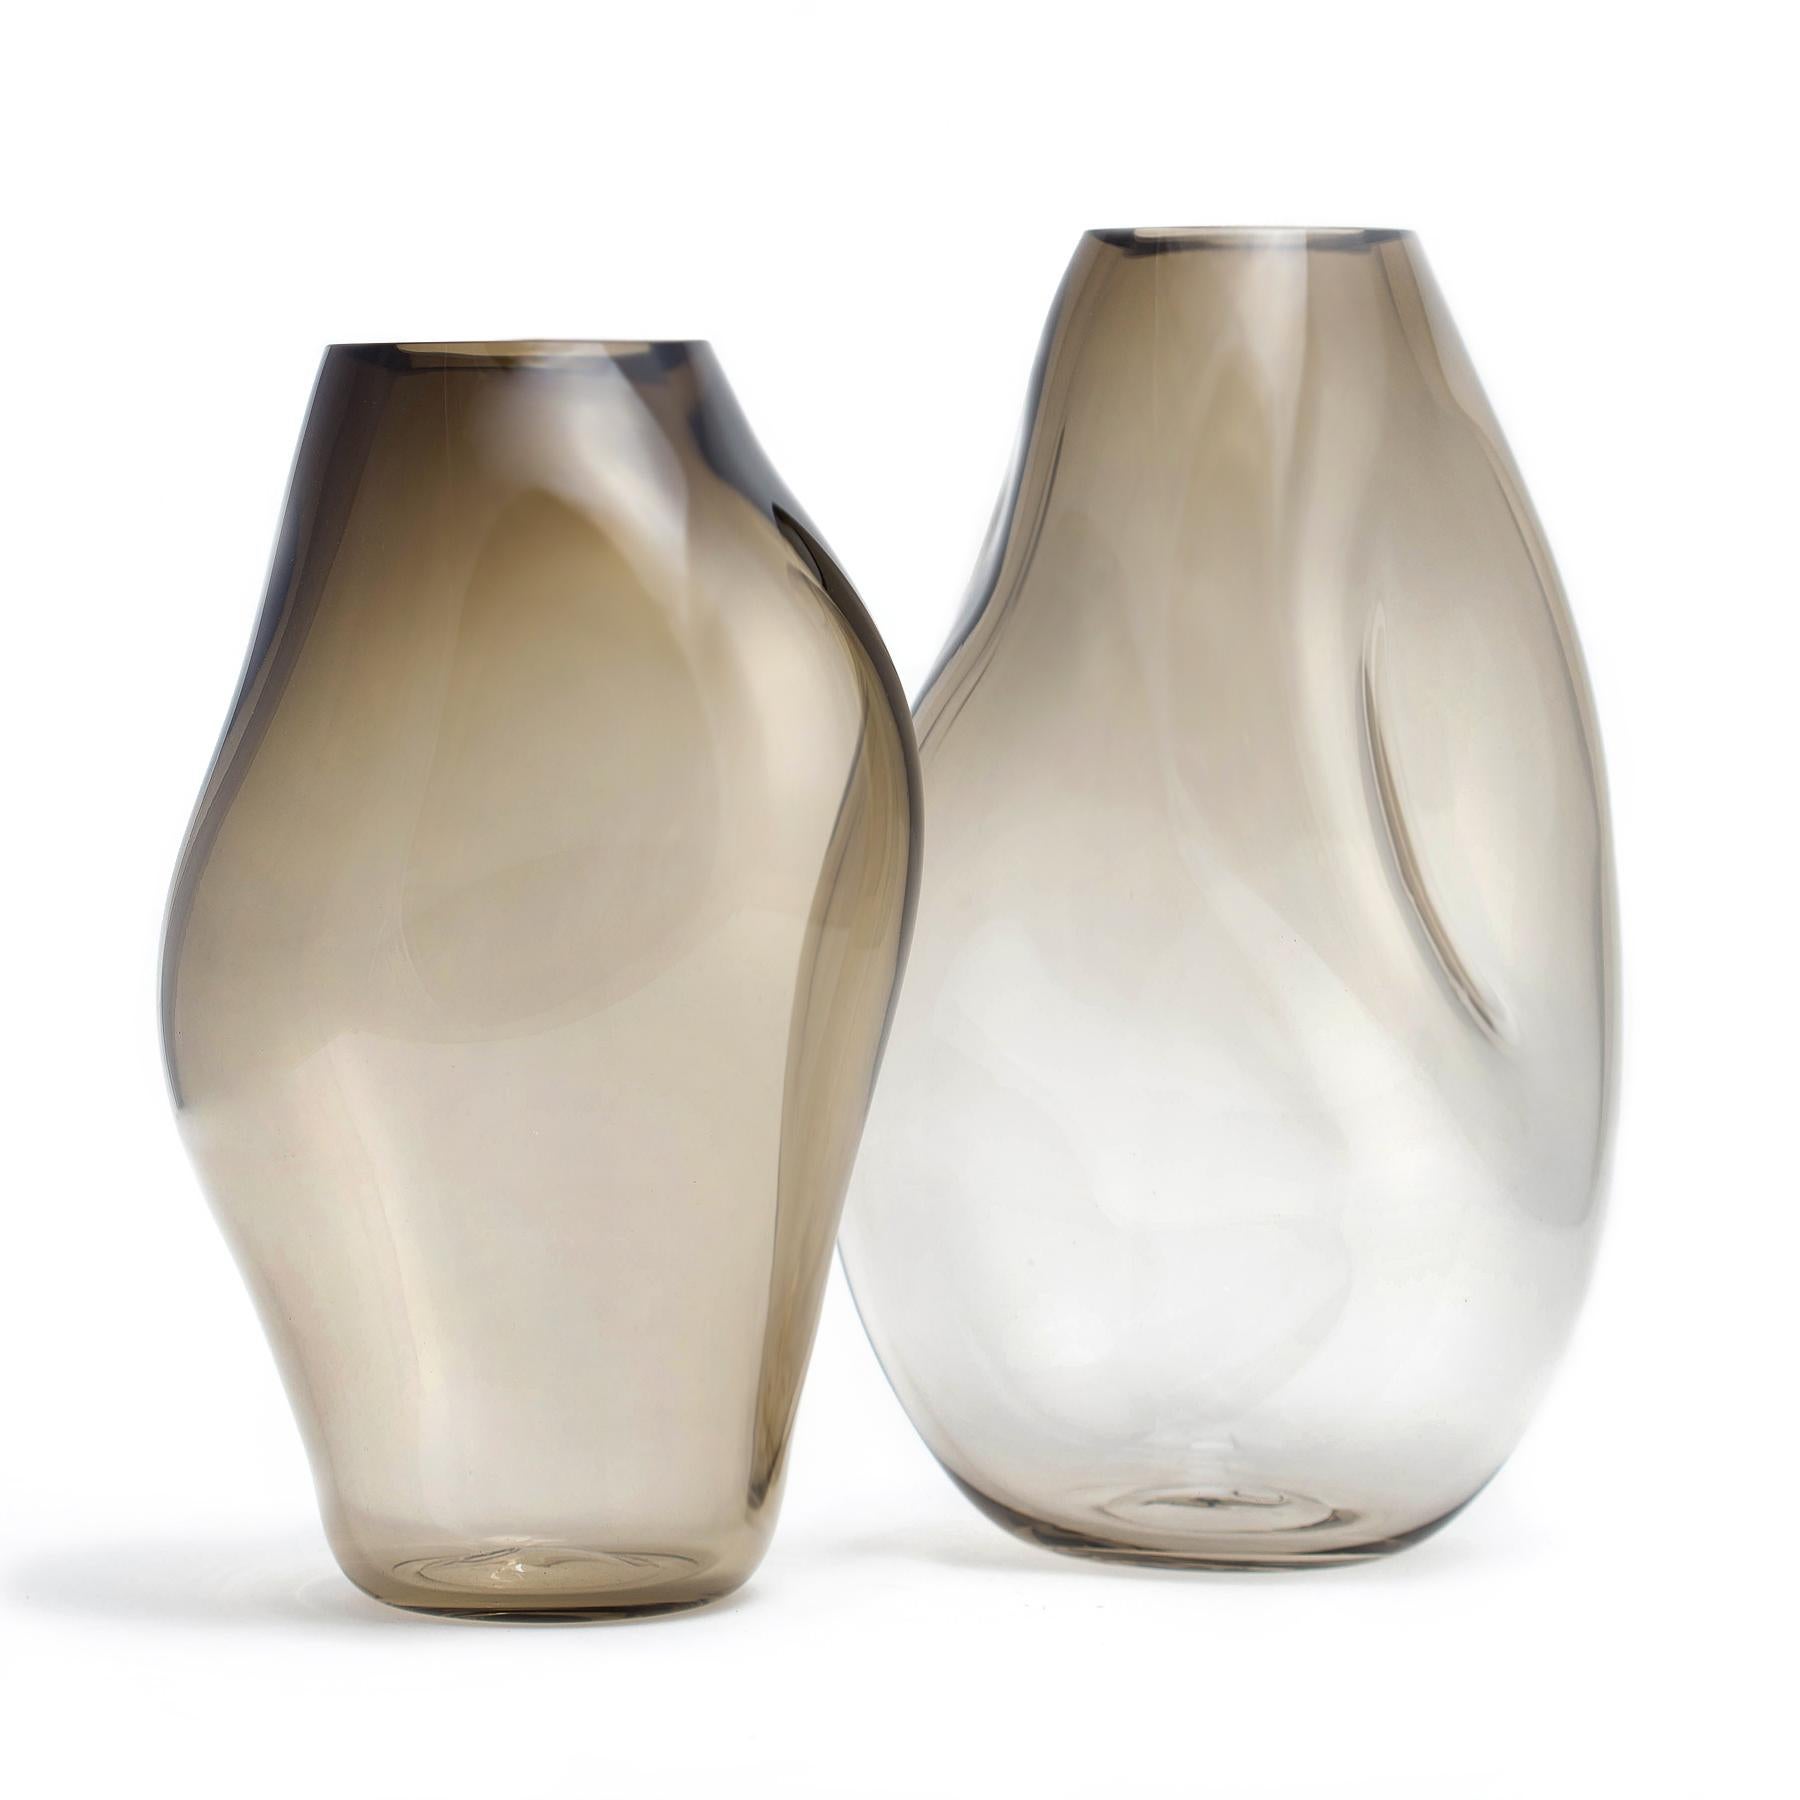 Set of 2 supernova IV silver smoke M/L vases by Eloa
No UL listed 
Material: glass
Dimensions: D 15 x W 17 x H 41 cm/ D 15 x W 17 x H 36 cm
Also available in different colours and dimensions.

SUPERNOVA is a collection of vases and bowls that,